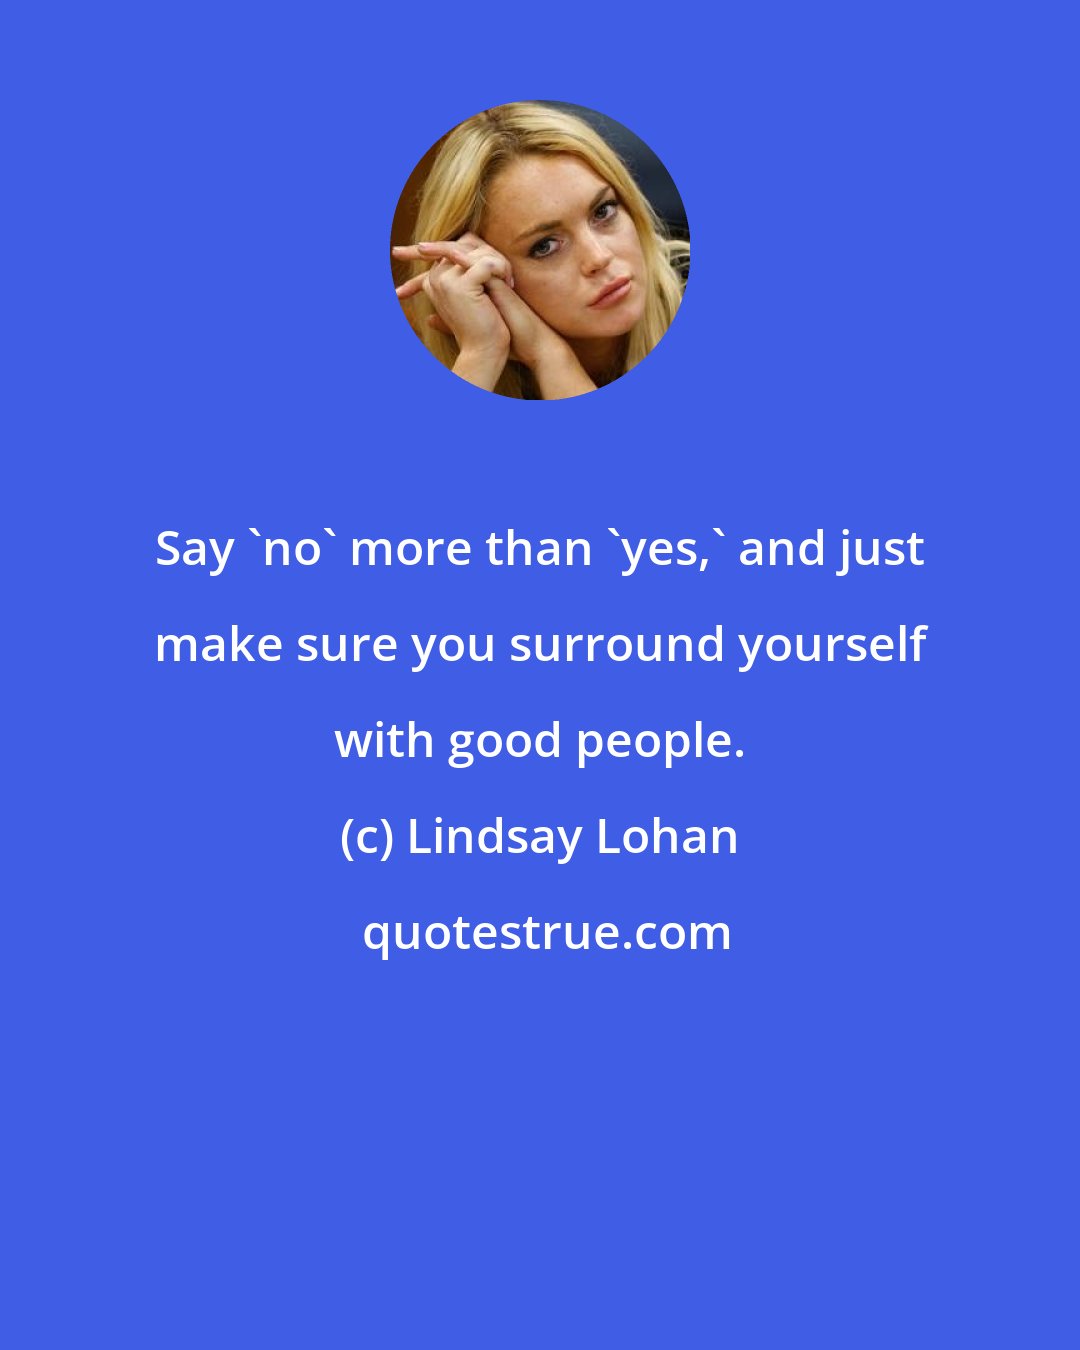 Lindsay Lohan: Say 'no' more than 'yes,' and just make sure you surround yourself with good people.